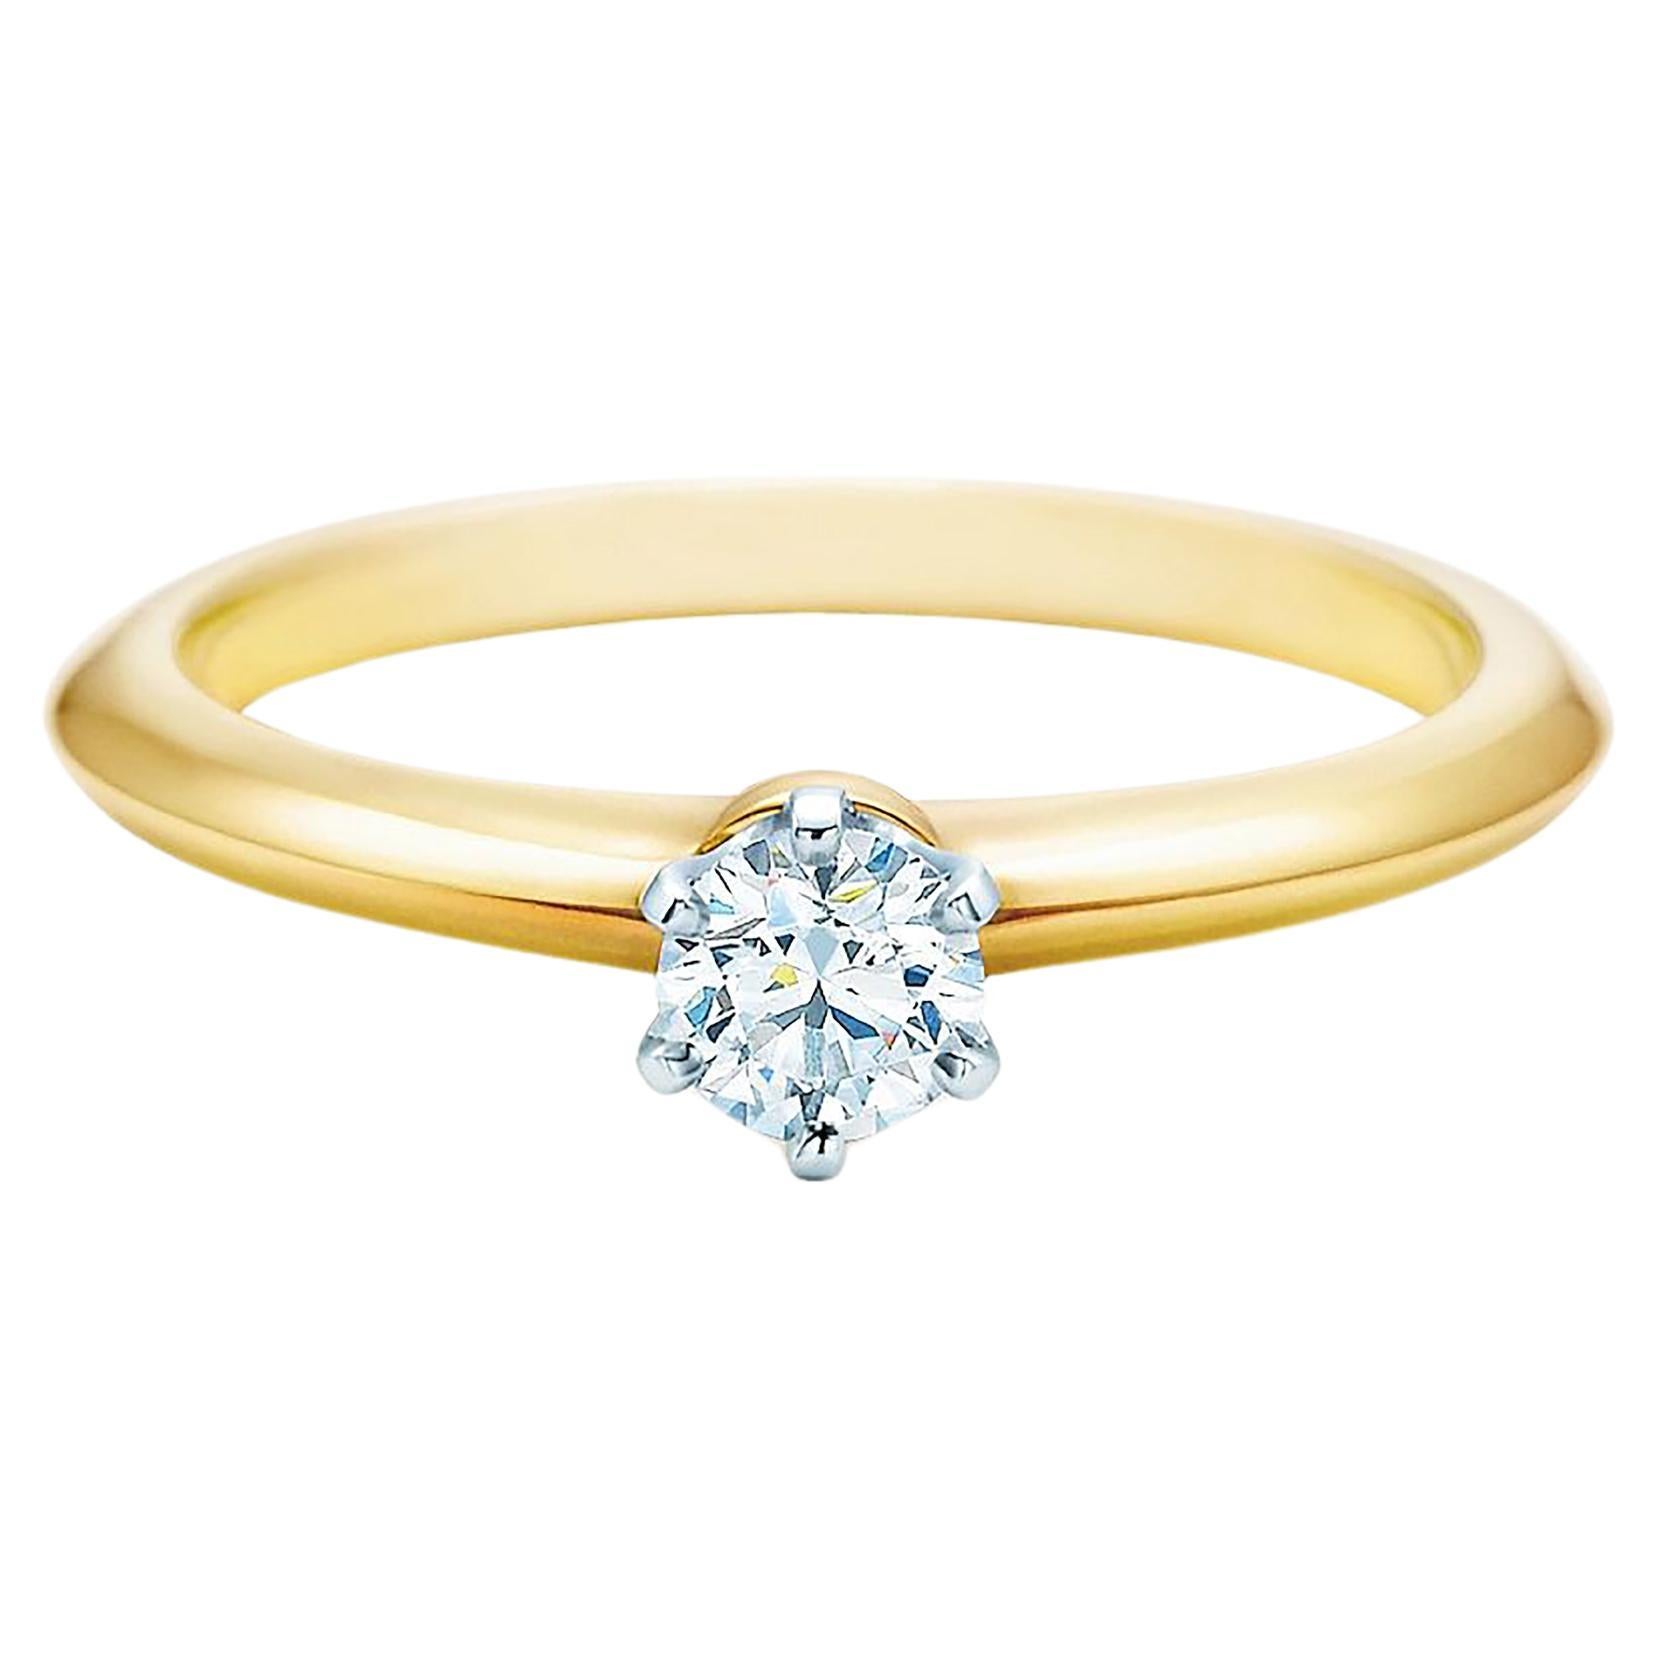 Tiffany & Co. 0.47 carat Diamond Solitaire Ring in 18K Gold